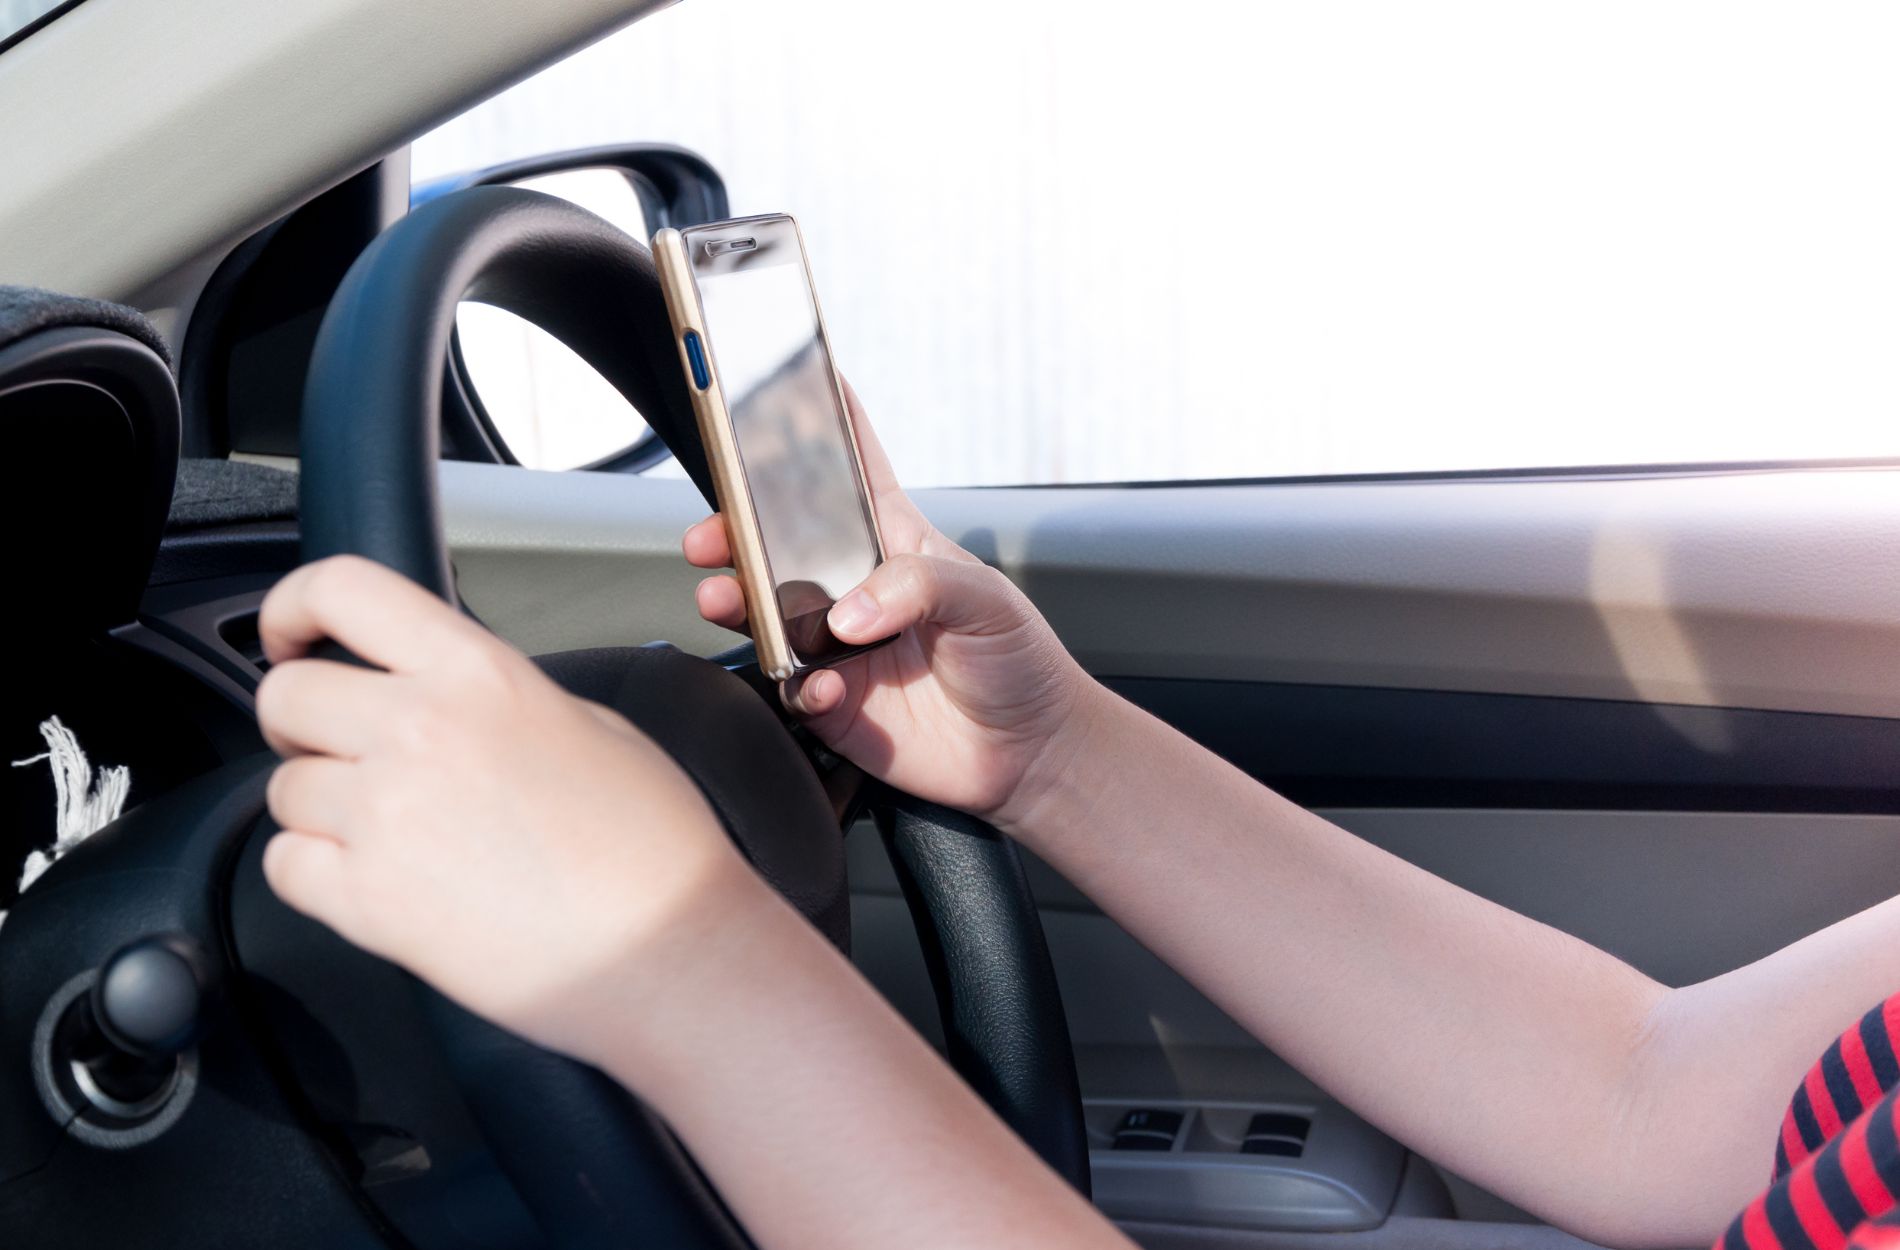 Cell Phone & Distracted Driving Laws